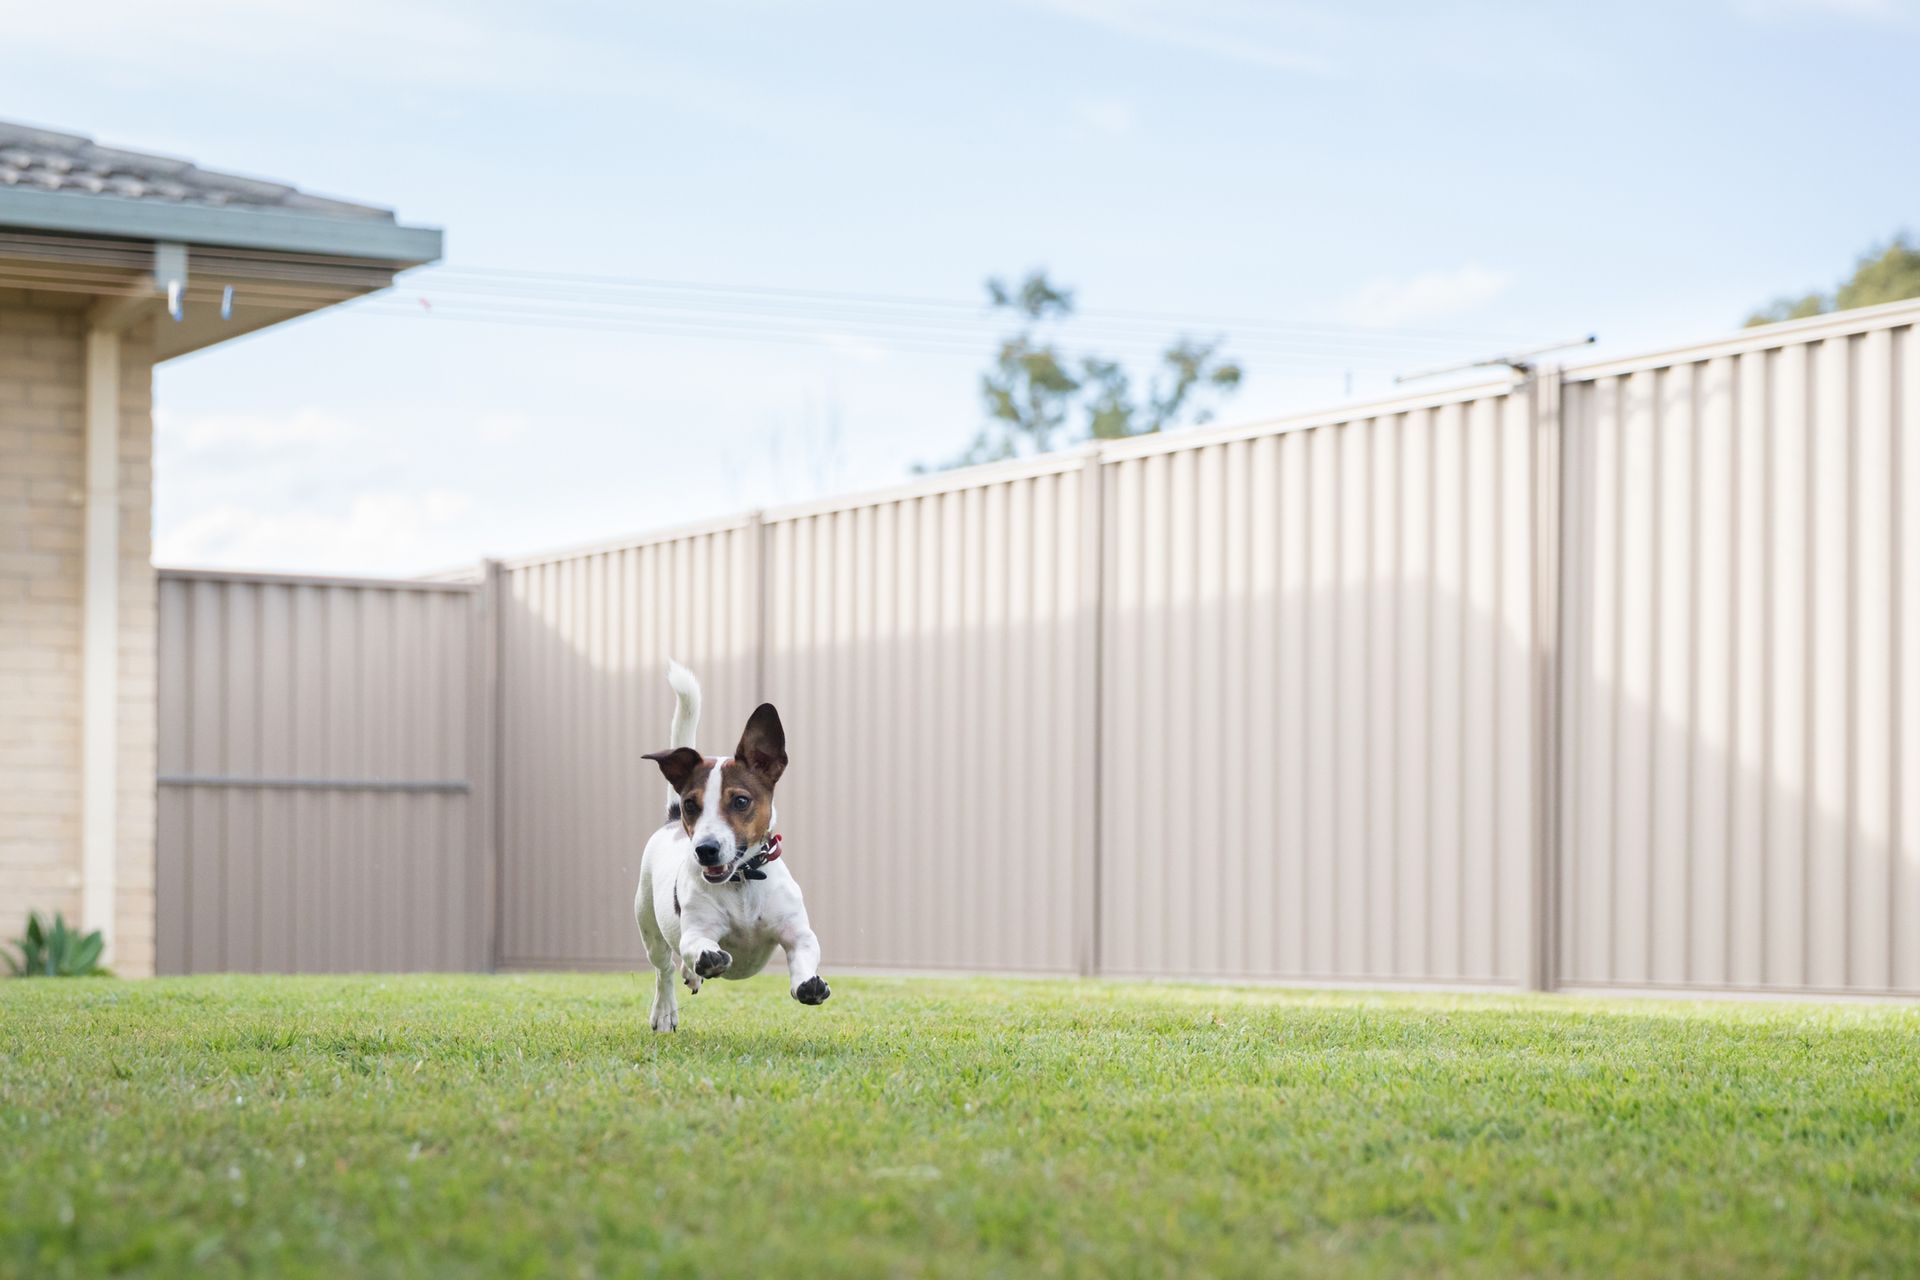 A dog is running in the grass in front of a fence.